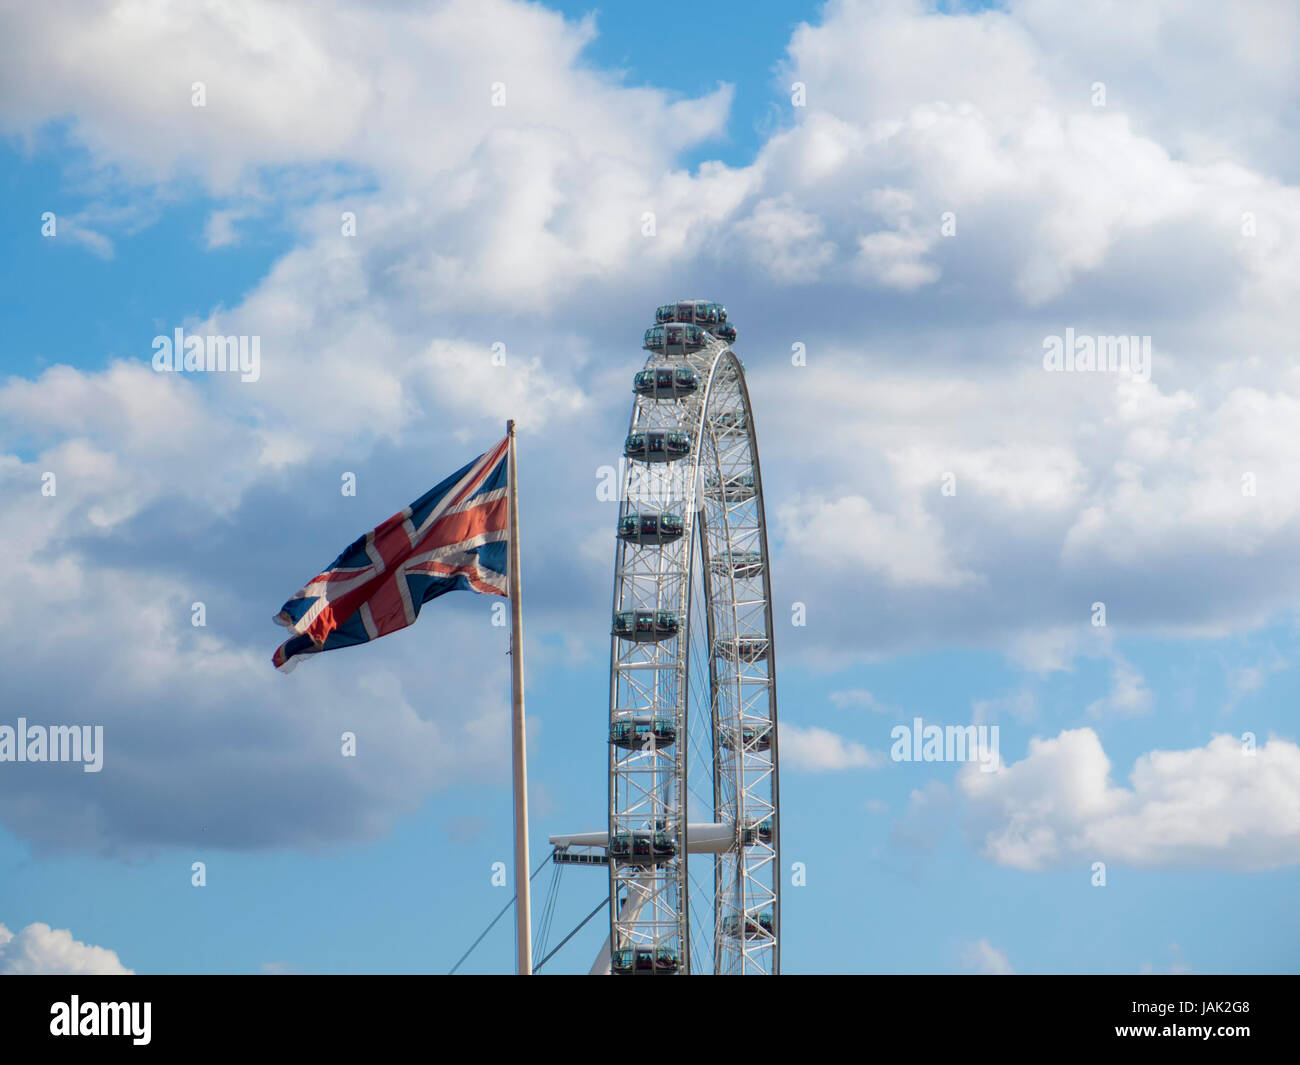 The London Eye Big Wheel with the union Jack in front on a flagpole Stock Photo